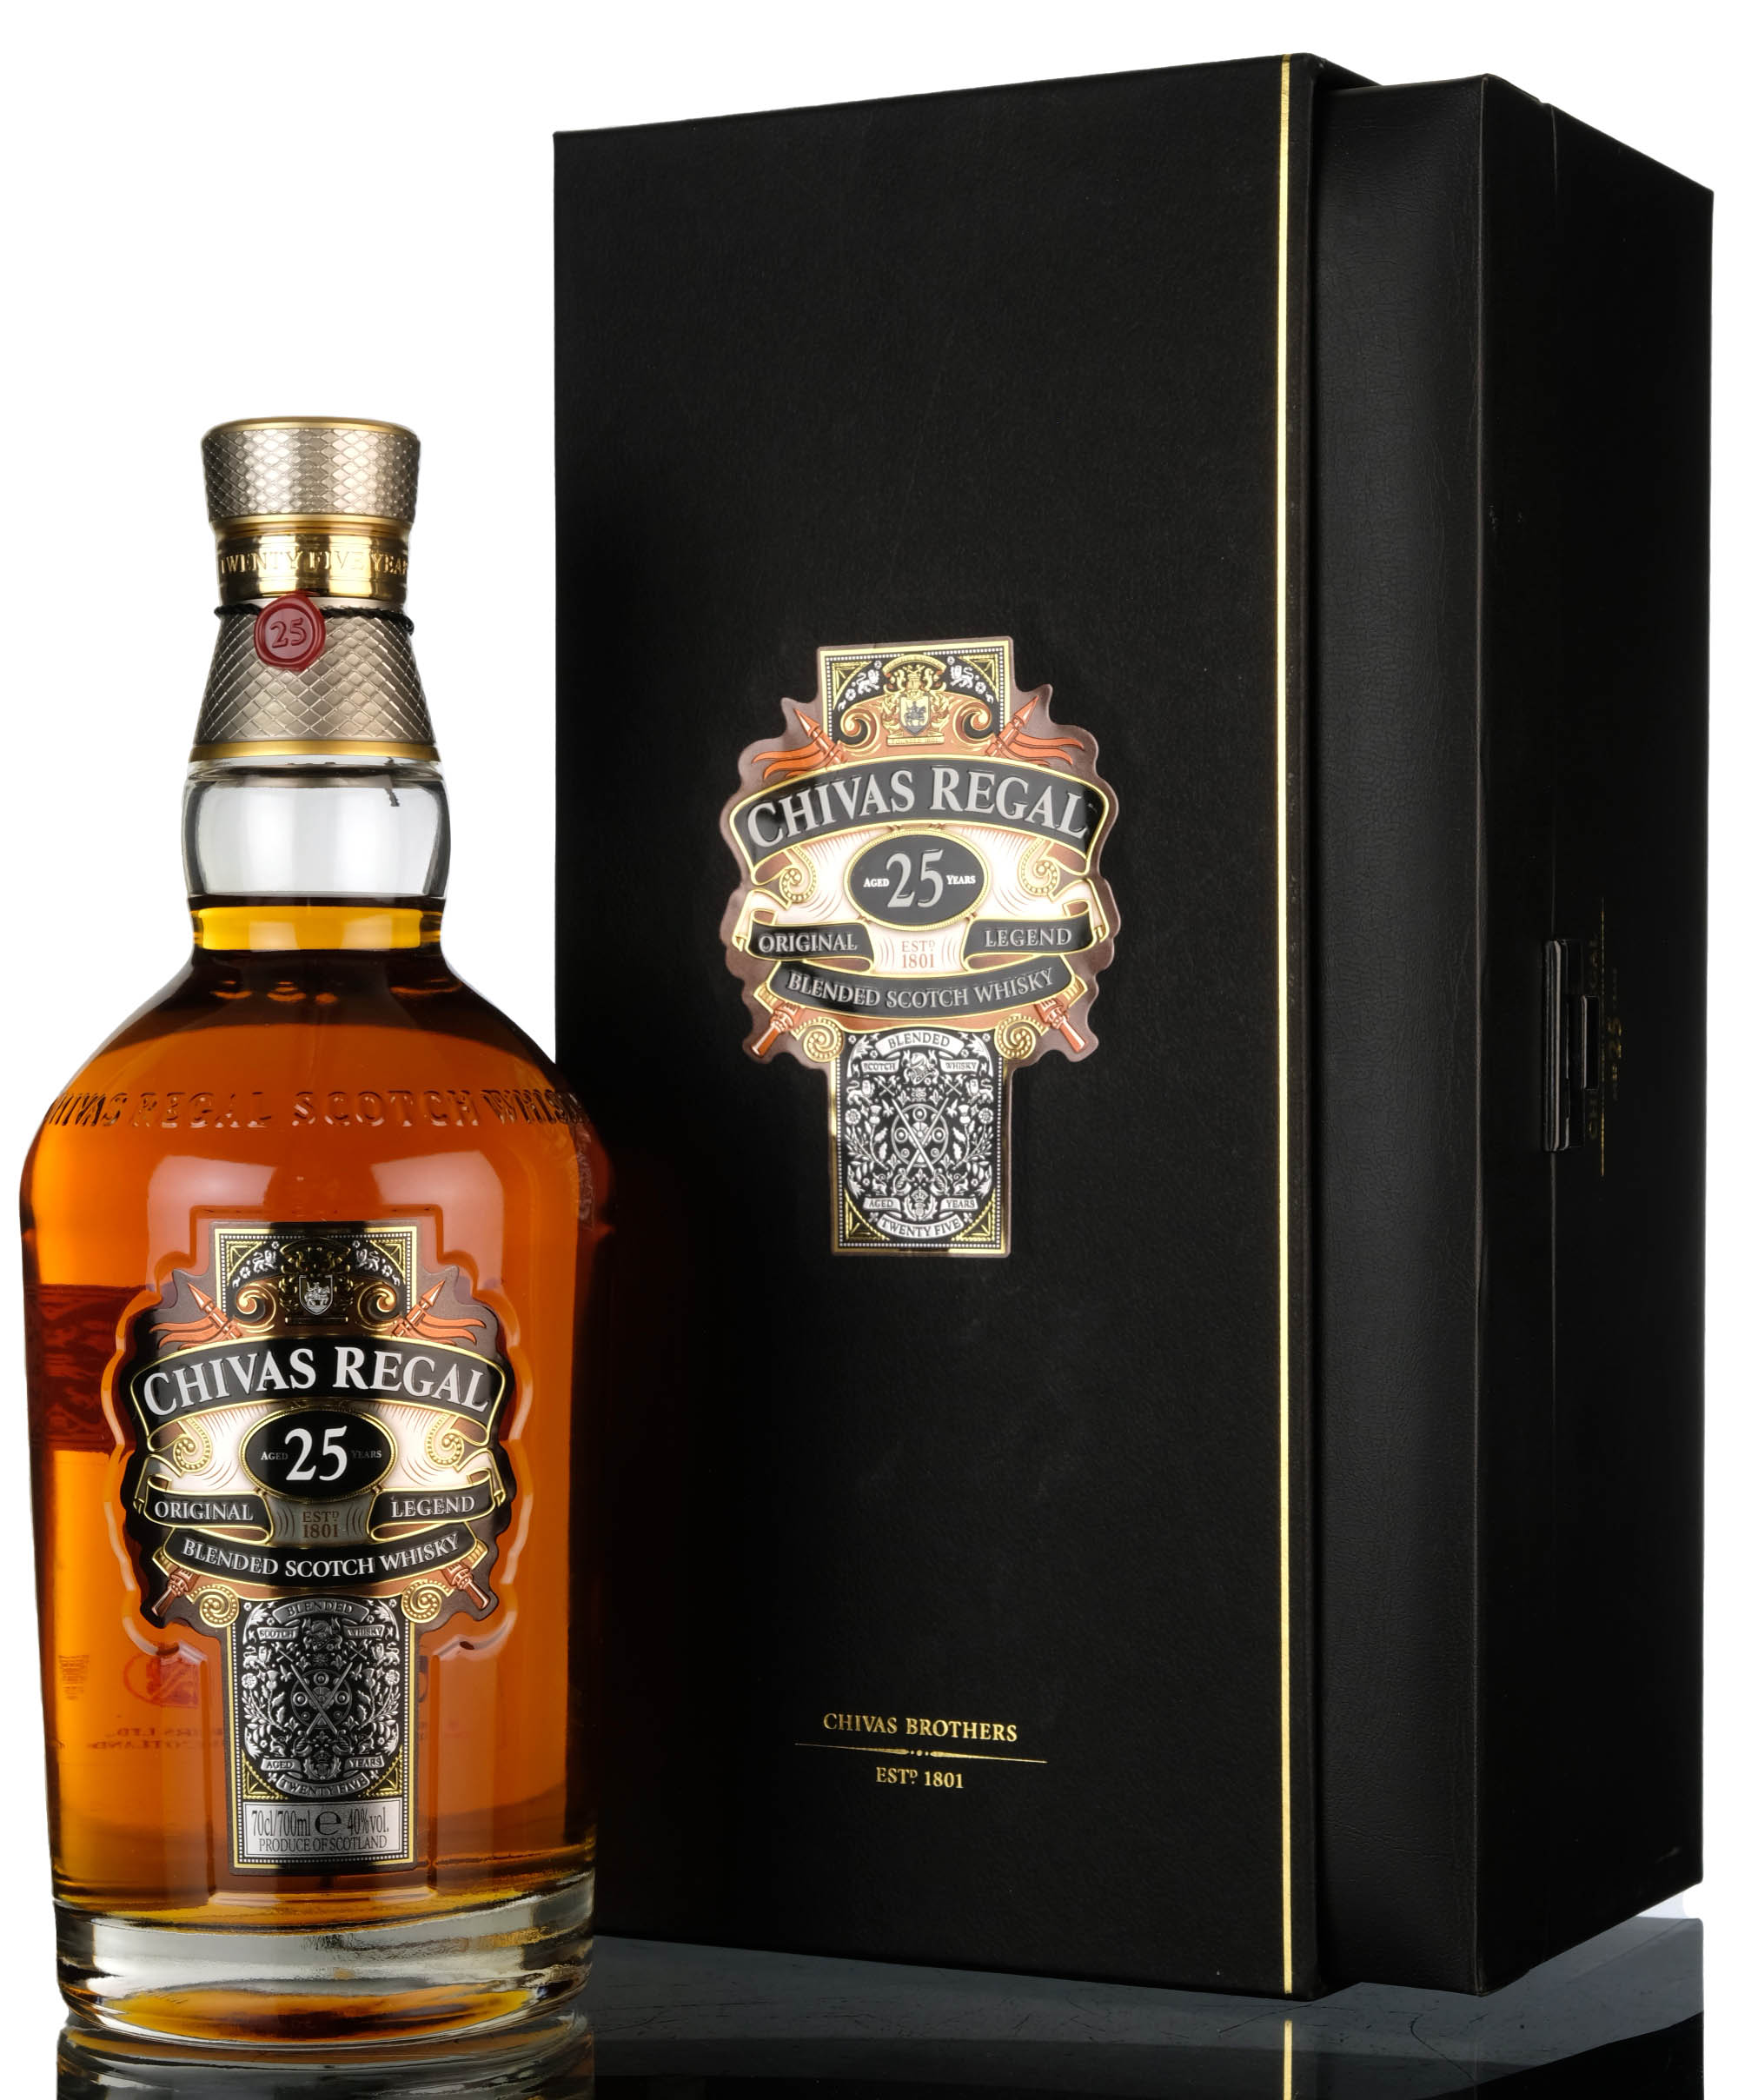 Chivas Regal 25 Year Old - Limited Edition